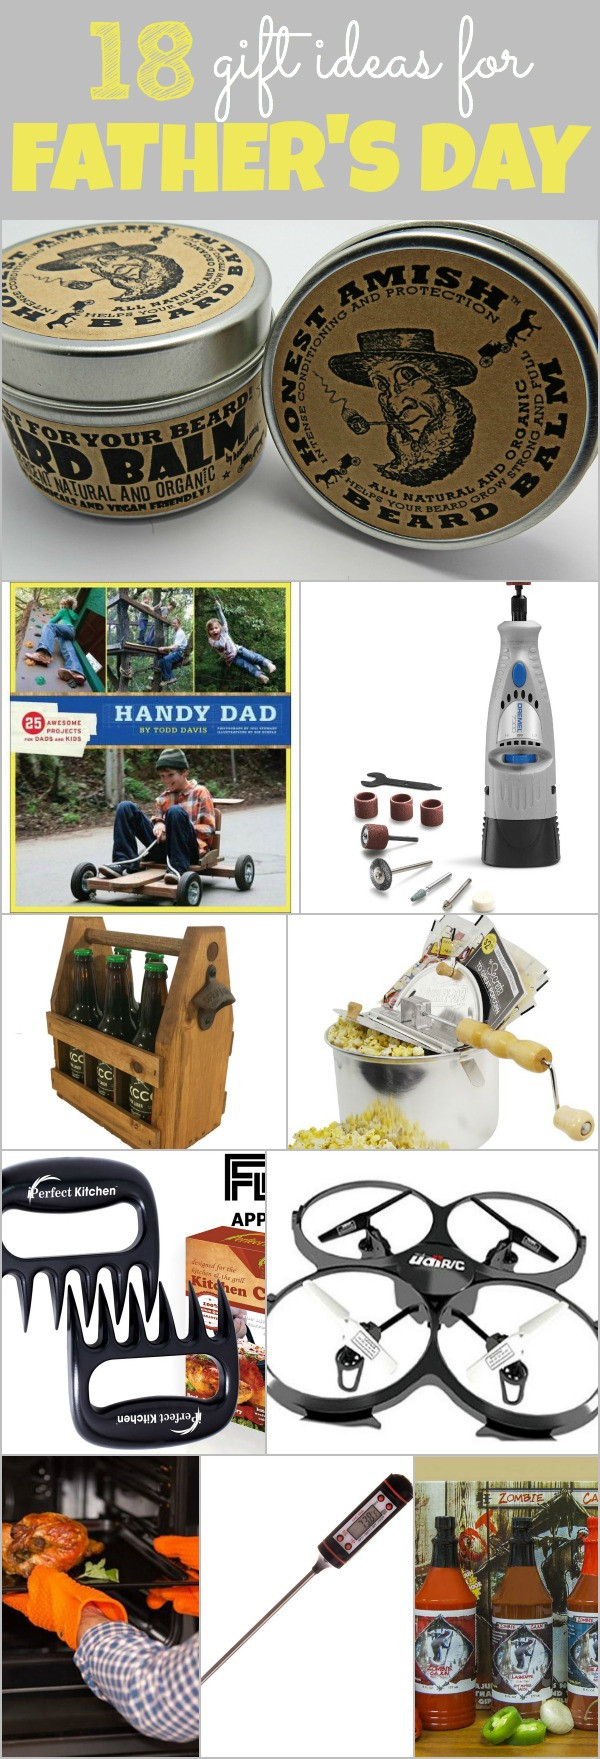 Mother'S Day Gift Ideas From Husband
 Father s Day Gift Ideas for Your Husband Home Stories A to Z